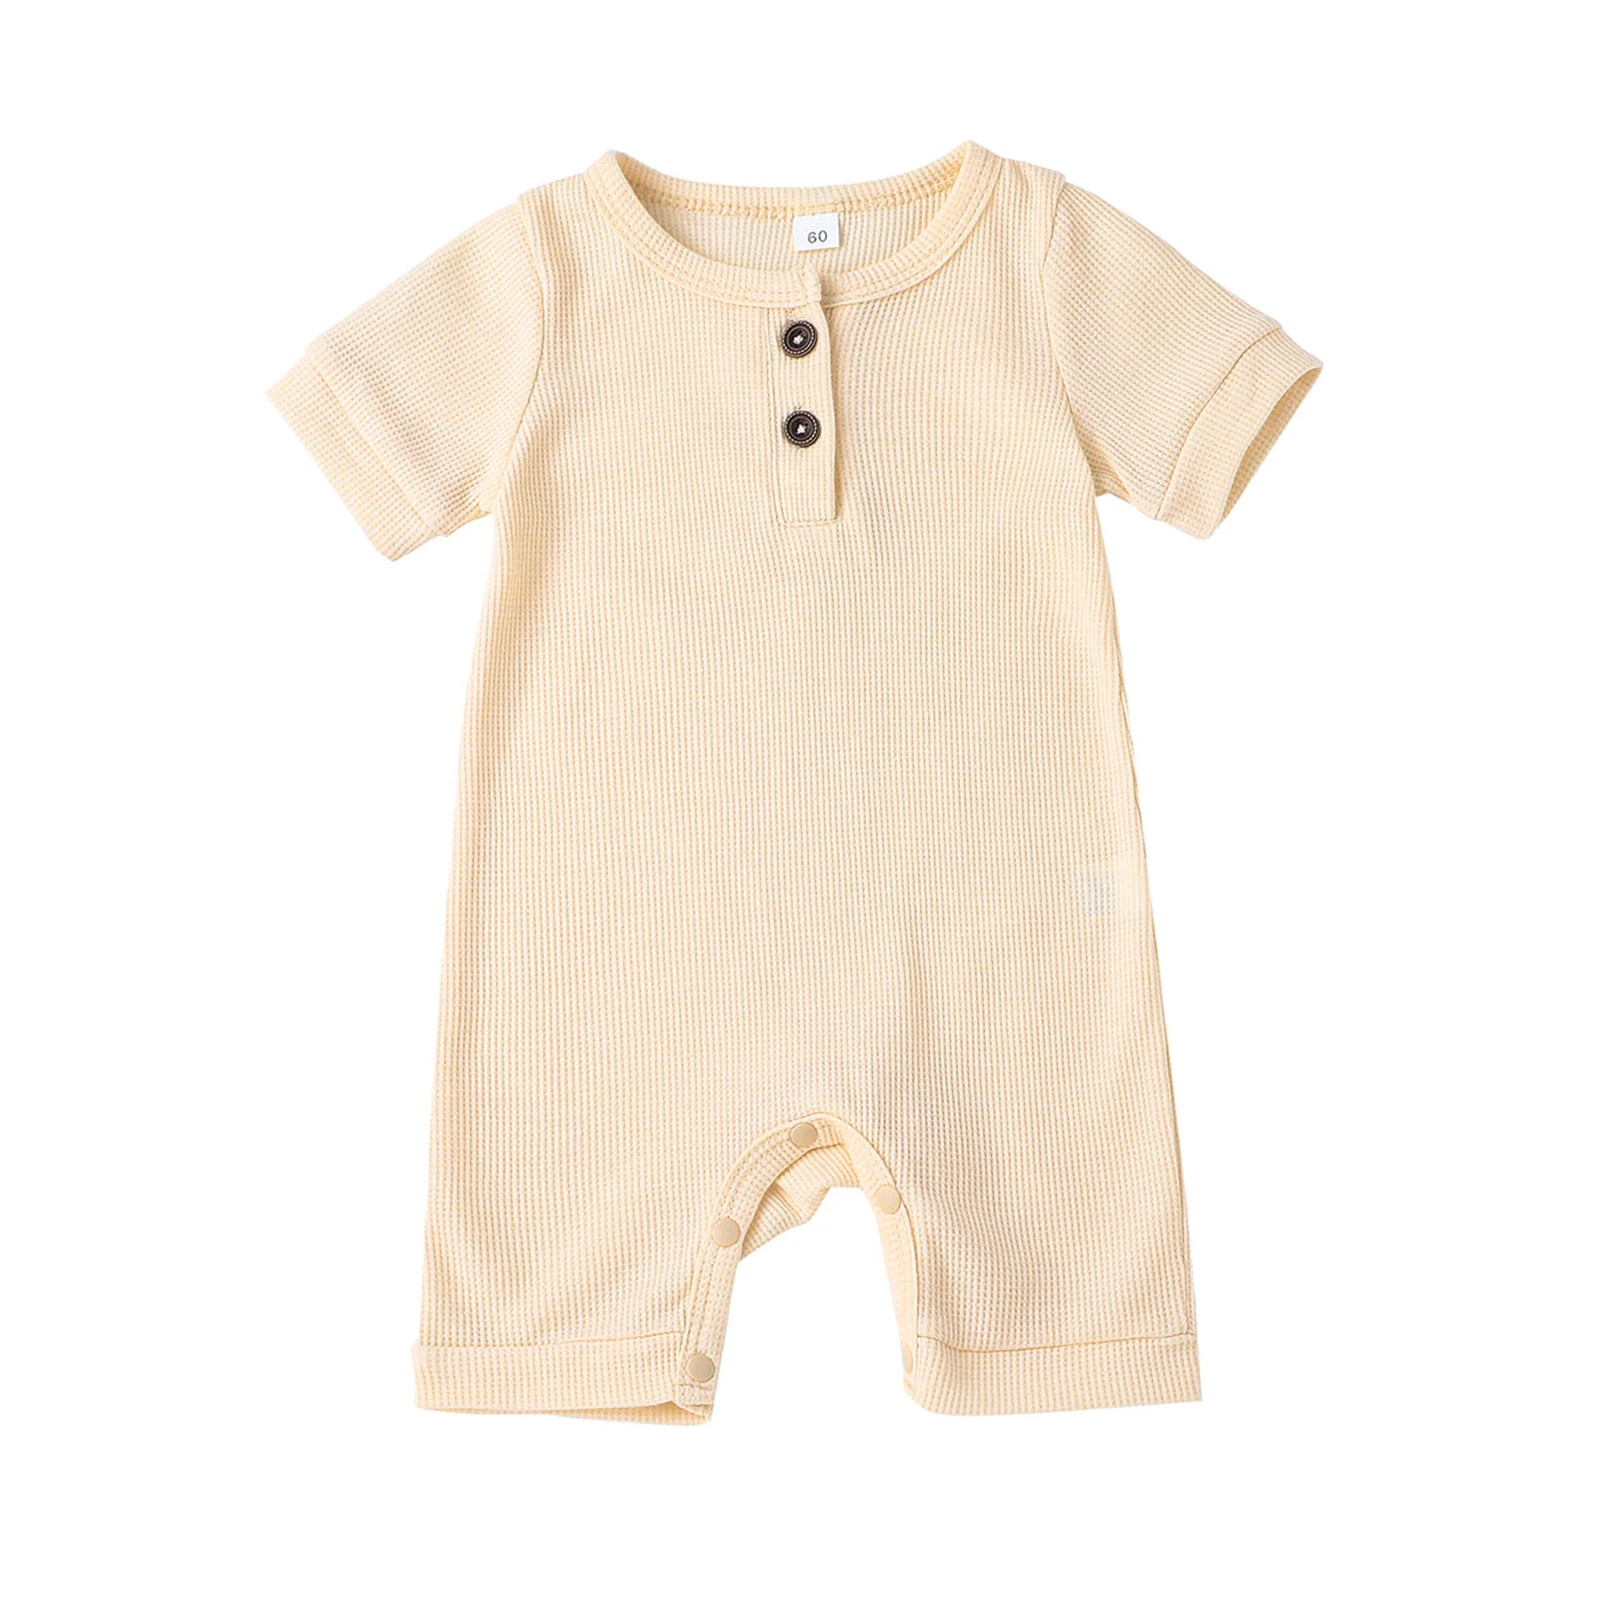 bright baby bodysuits	 2022 Baby Girls Boys Jumpsuits Baby Simple Solid Color Short Sleeve Romper Cotton Summer Clothes Baby Rompers bamboo baby bodysuits	 Baby Rompers